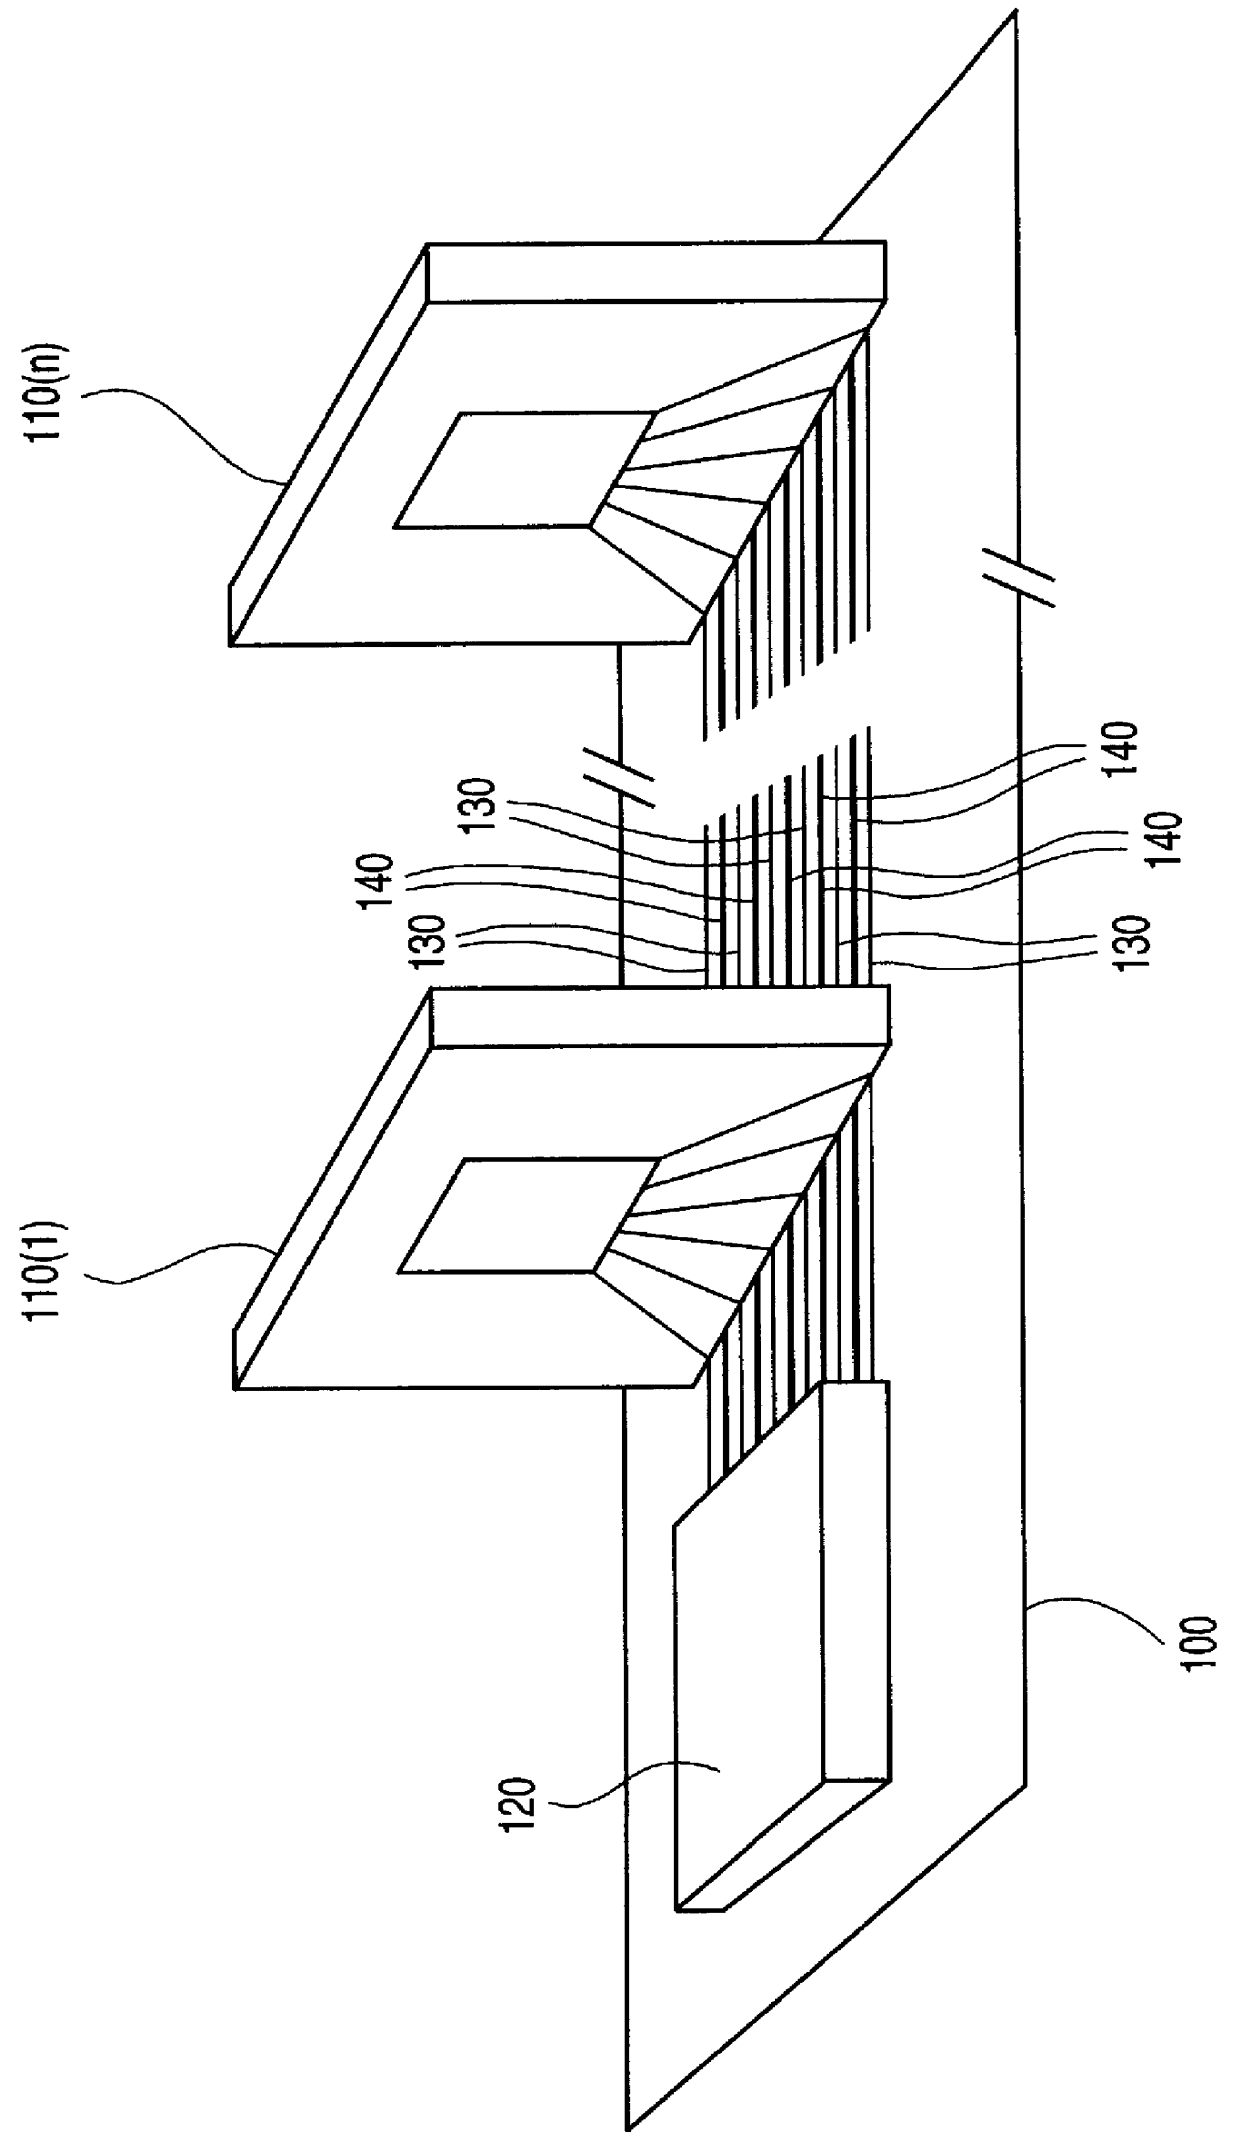 Via pad geometry supporting uniform transmission line structures